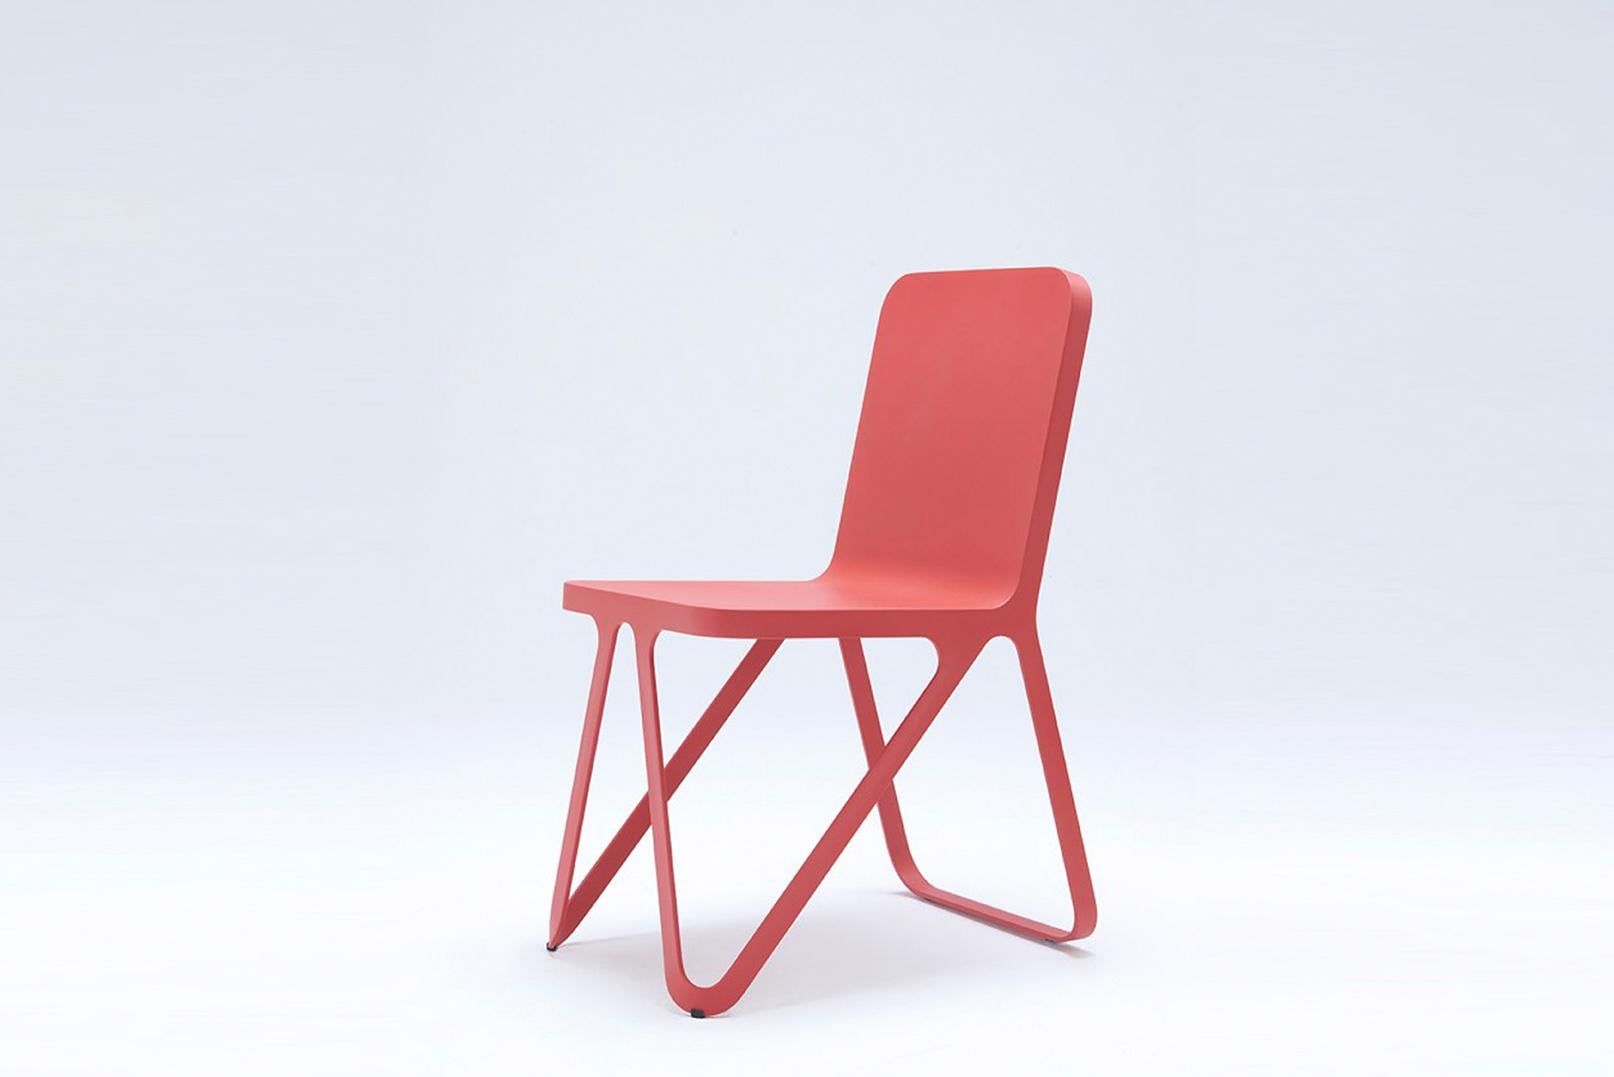 Red loop chair by Sebastian Scherer.
Dimensions: D 57x W 40 x H 80 cm.
Material: Aluminium.
Weight: 5.1 kg.
Also available: Colours: Snow white / light sand / sun yellow / clay orange / rust red / space blue / graphite grey / dark bronze / night